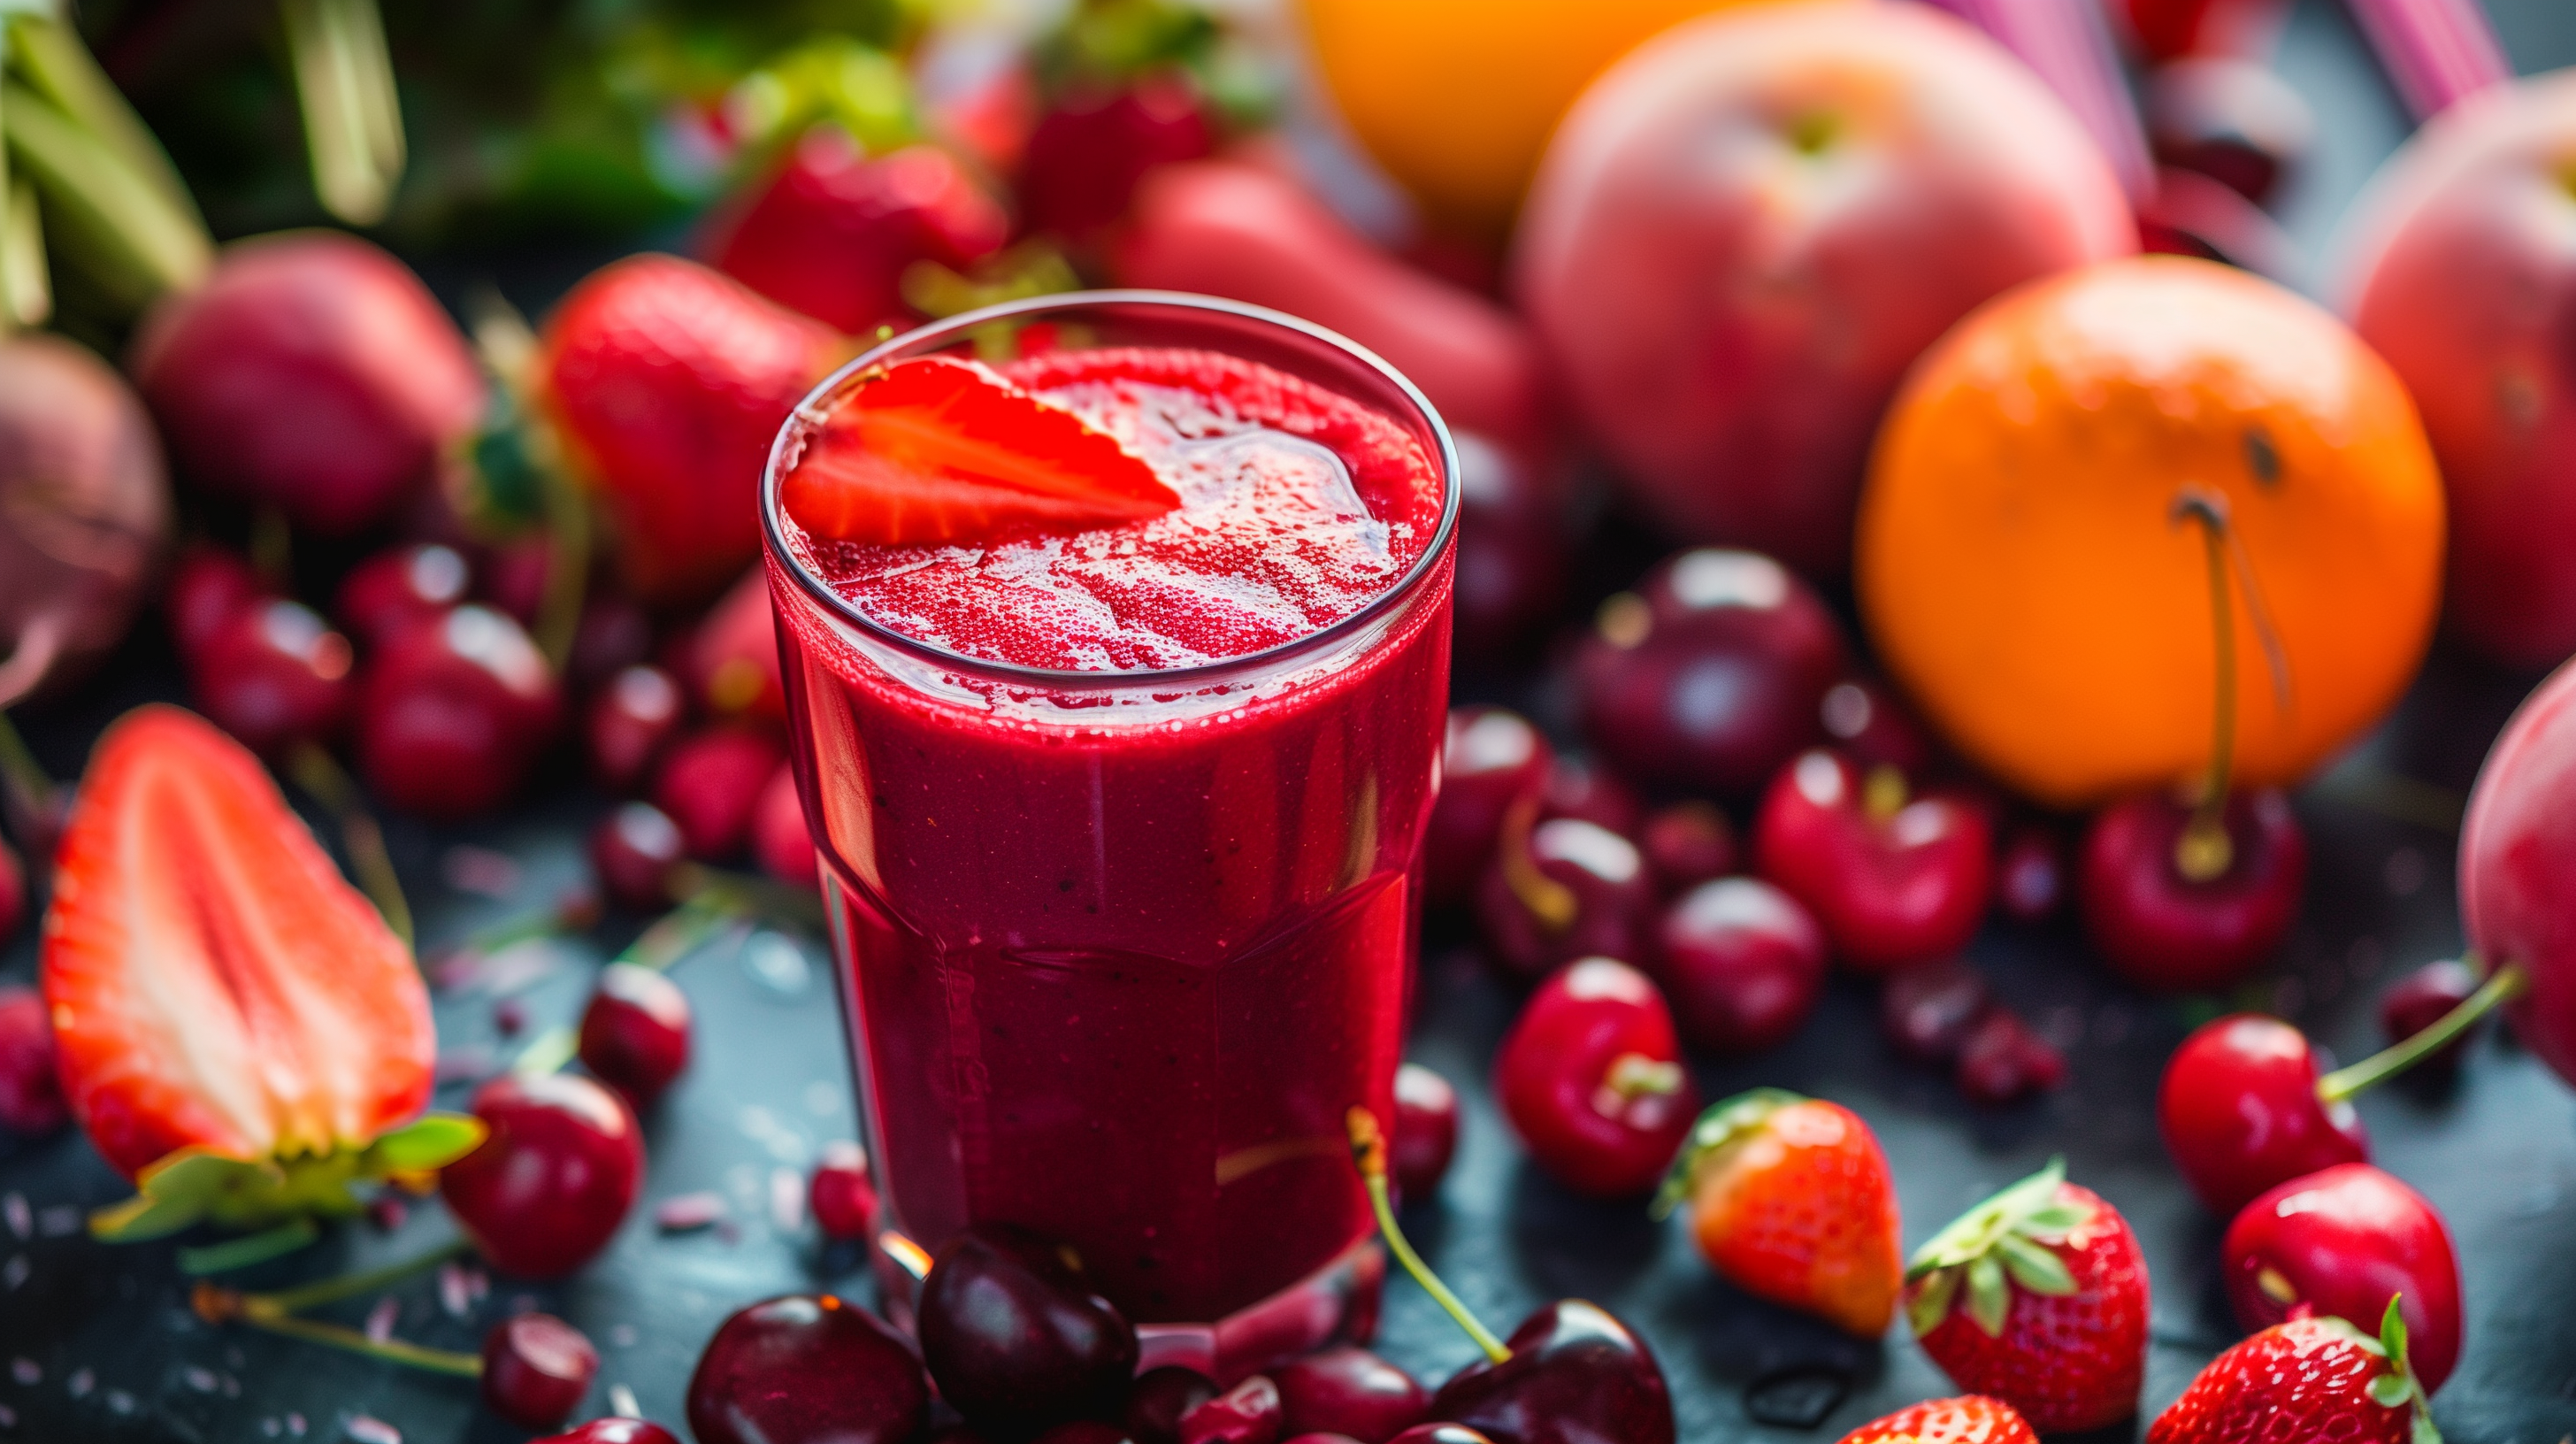 red smoothie surrounded by vibrant fruits like strawberries, cherries, and beets